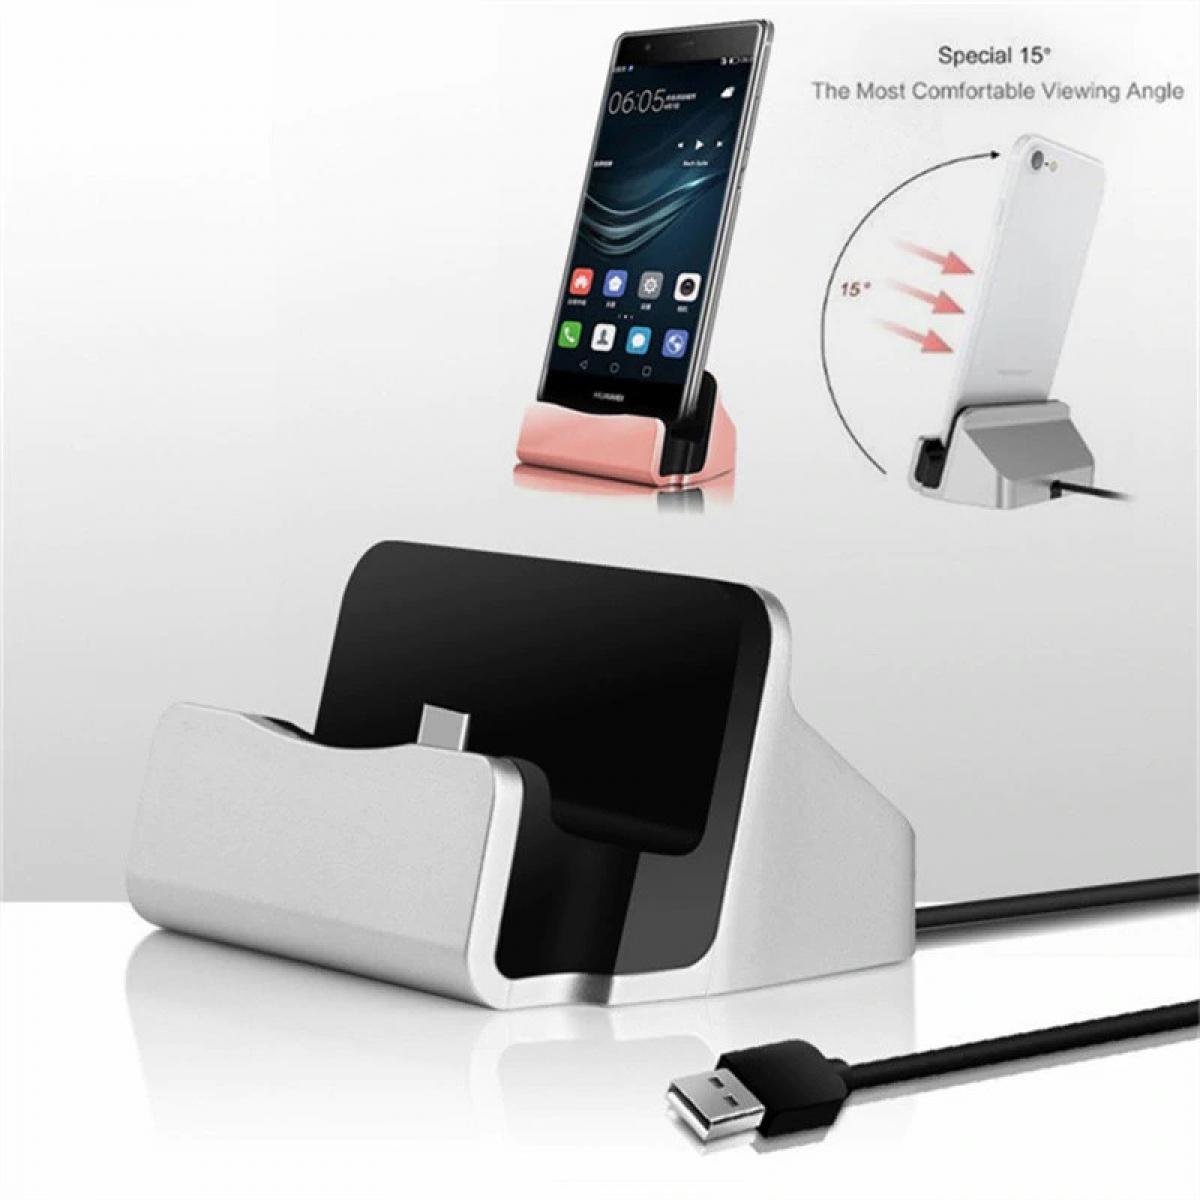 Shot - Station d'Accueil de Chargement pour HUAWEI Y6 2019 Smartphone Micro USB Support Chargeur Bureau (ROSE) - Station d'accueil smartphone